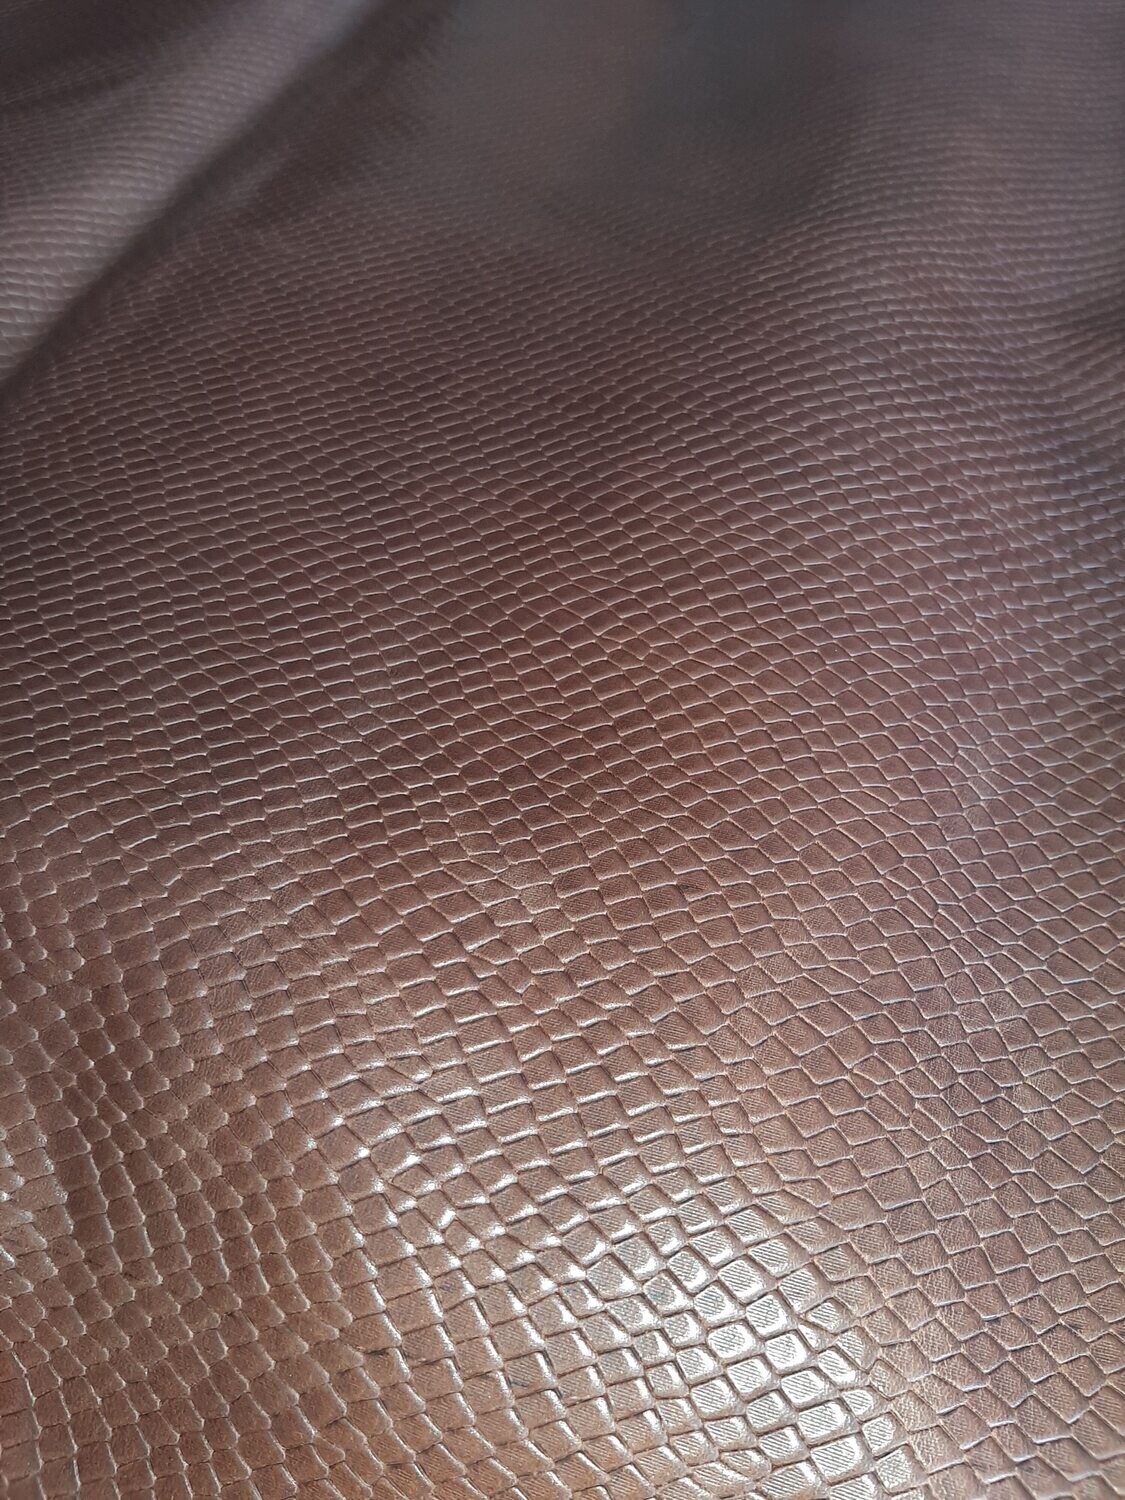 Leather bovine embossed brown color